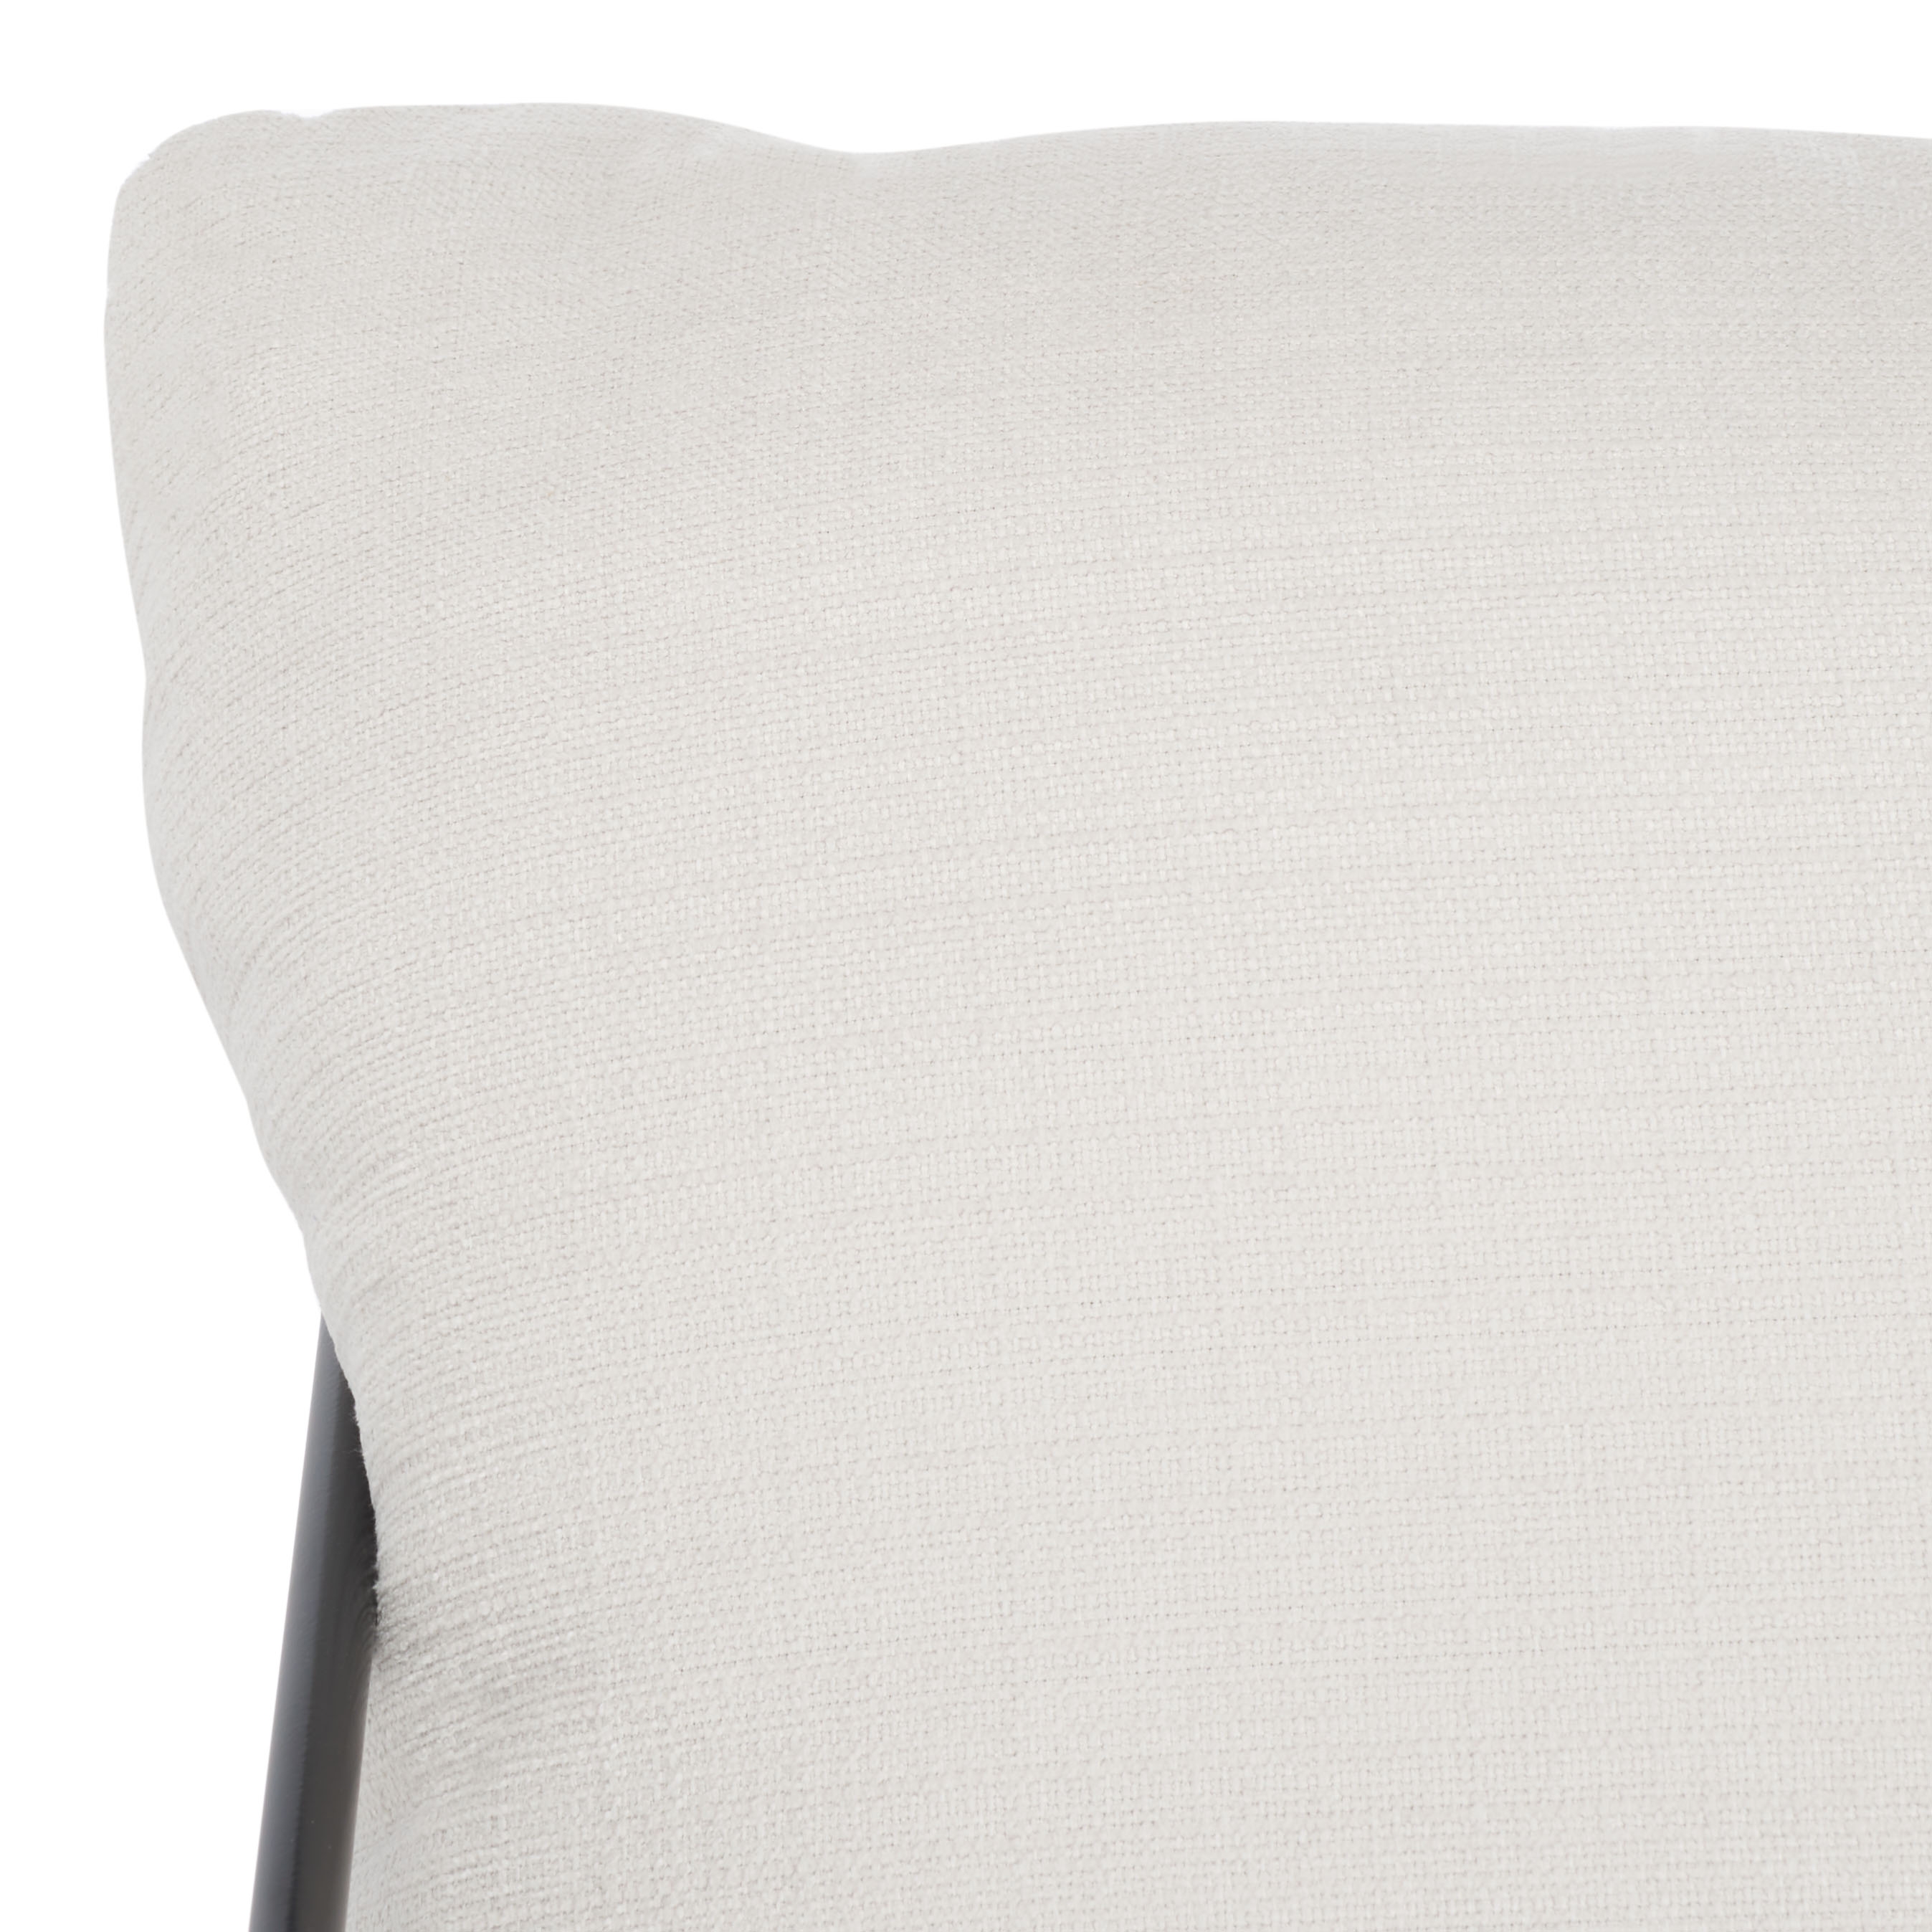 Portland Pillow Top Accent Chair - Ivory/Black - Safavieh - Image 7